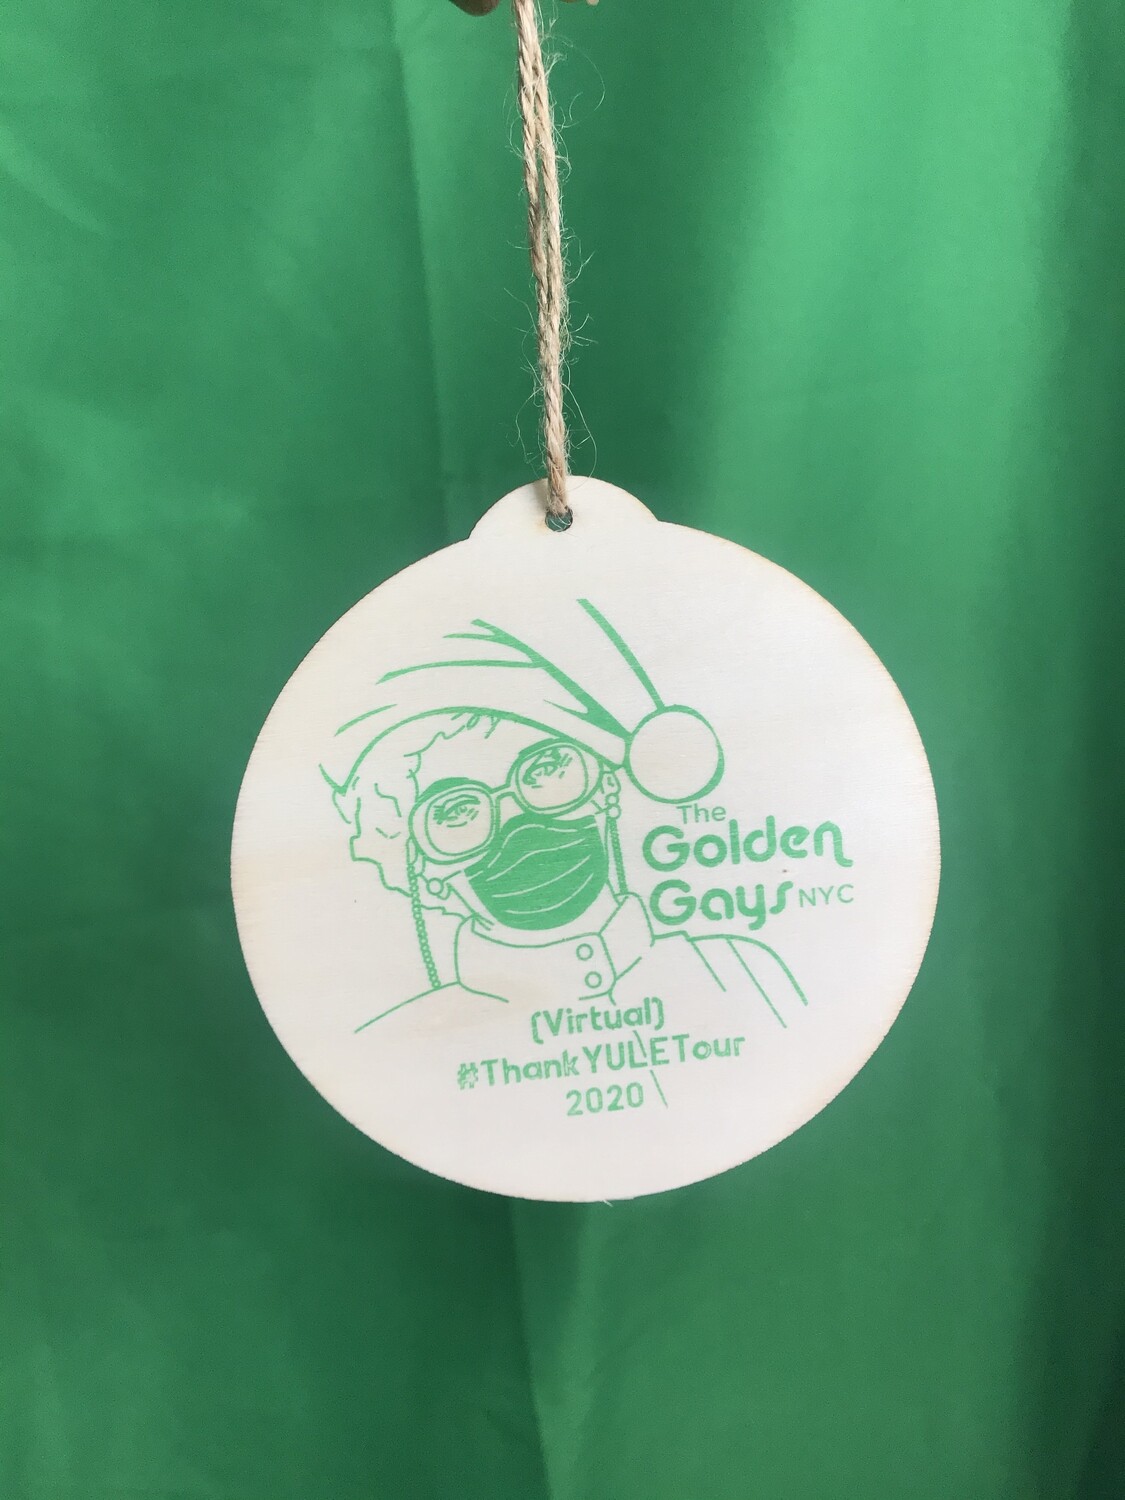 ORNAMENT - GGNYC Thank Yule (Virtual) Tour 2020 - EXTREMELY LIMITED 1 for $5 2 for $8